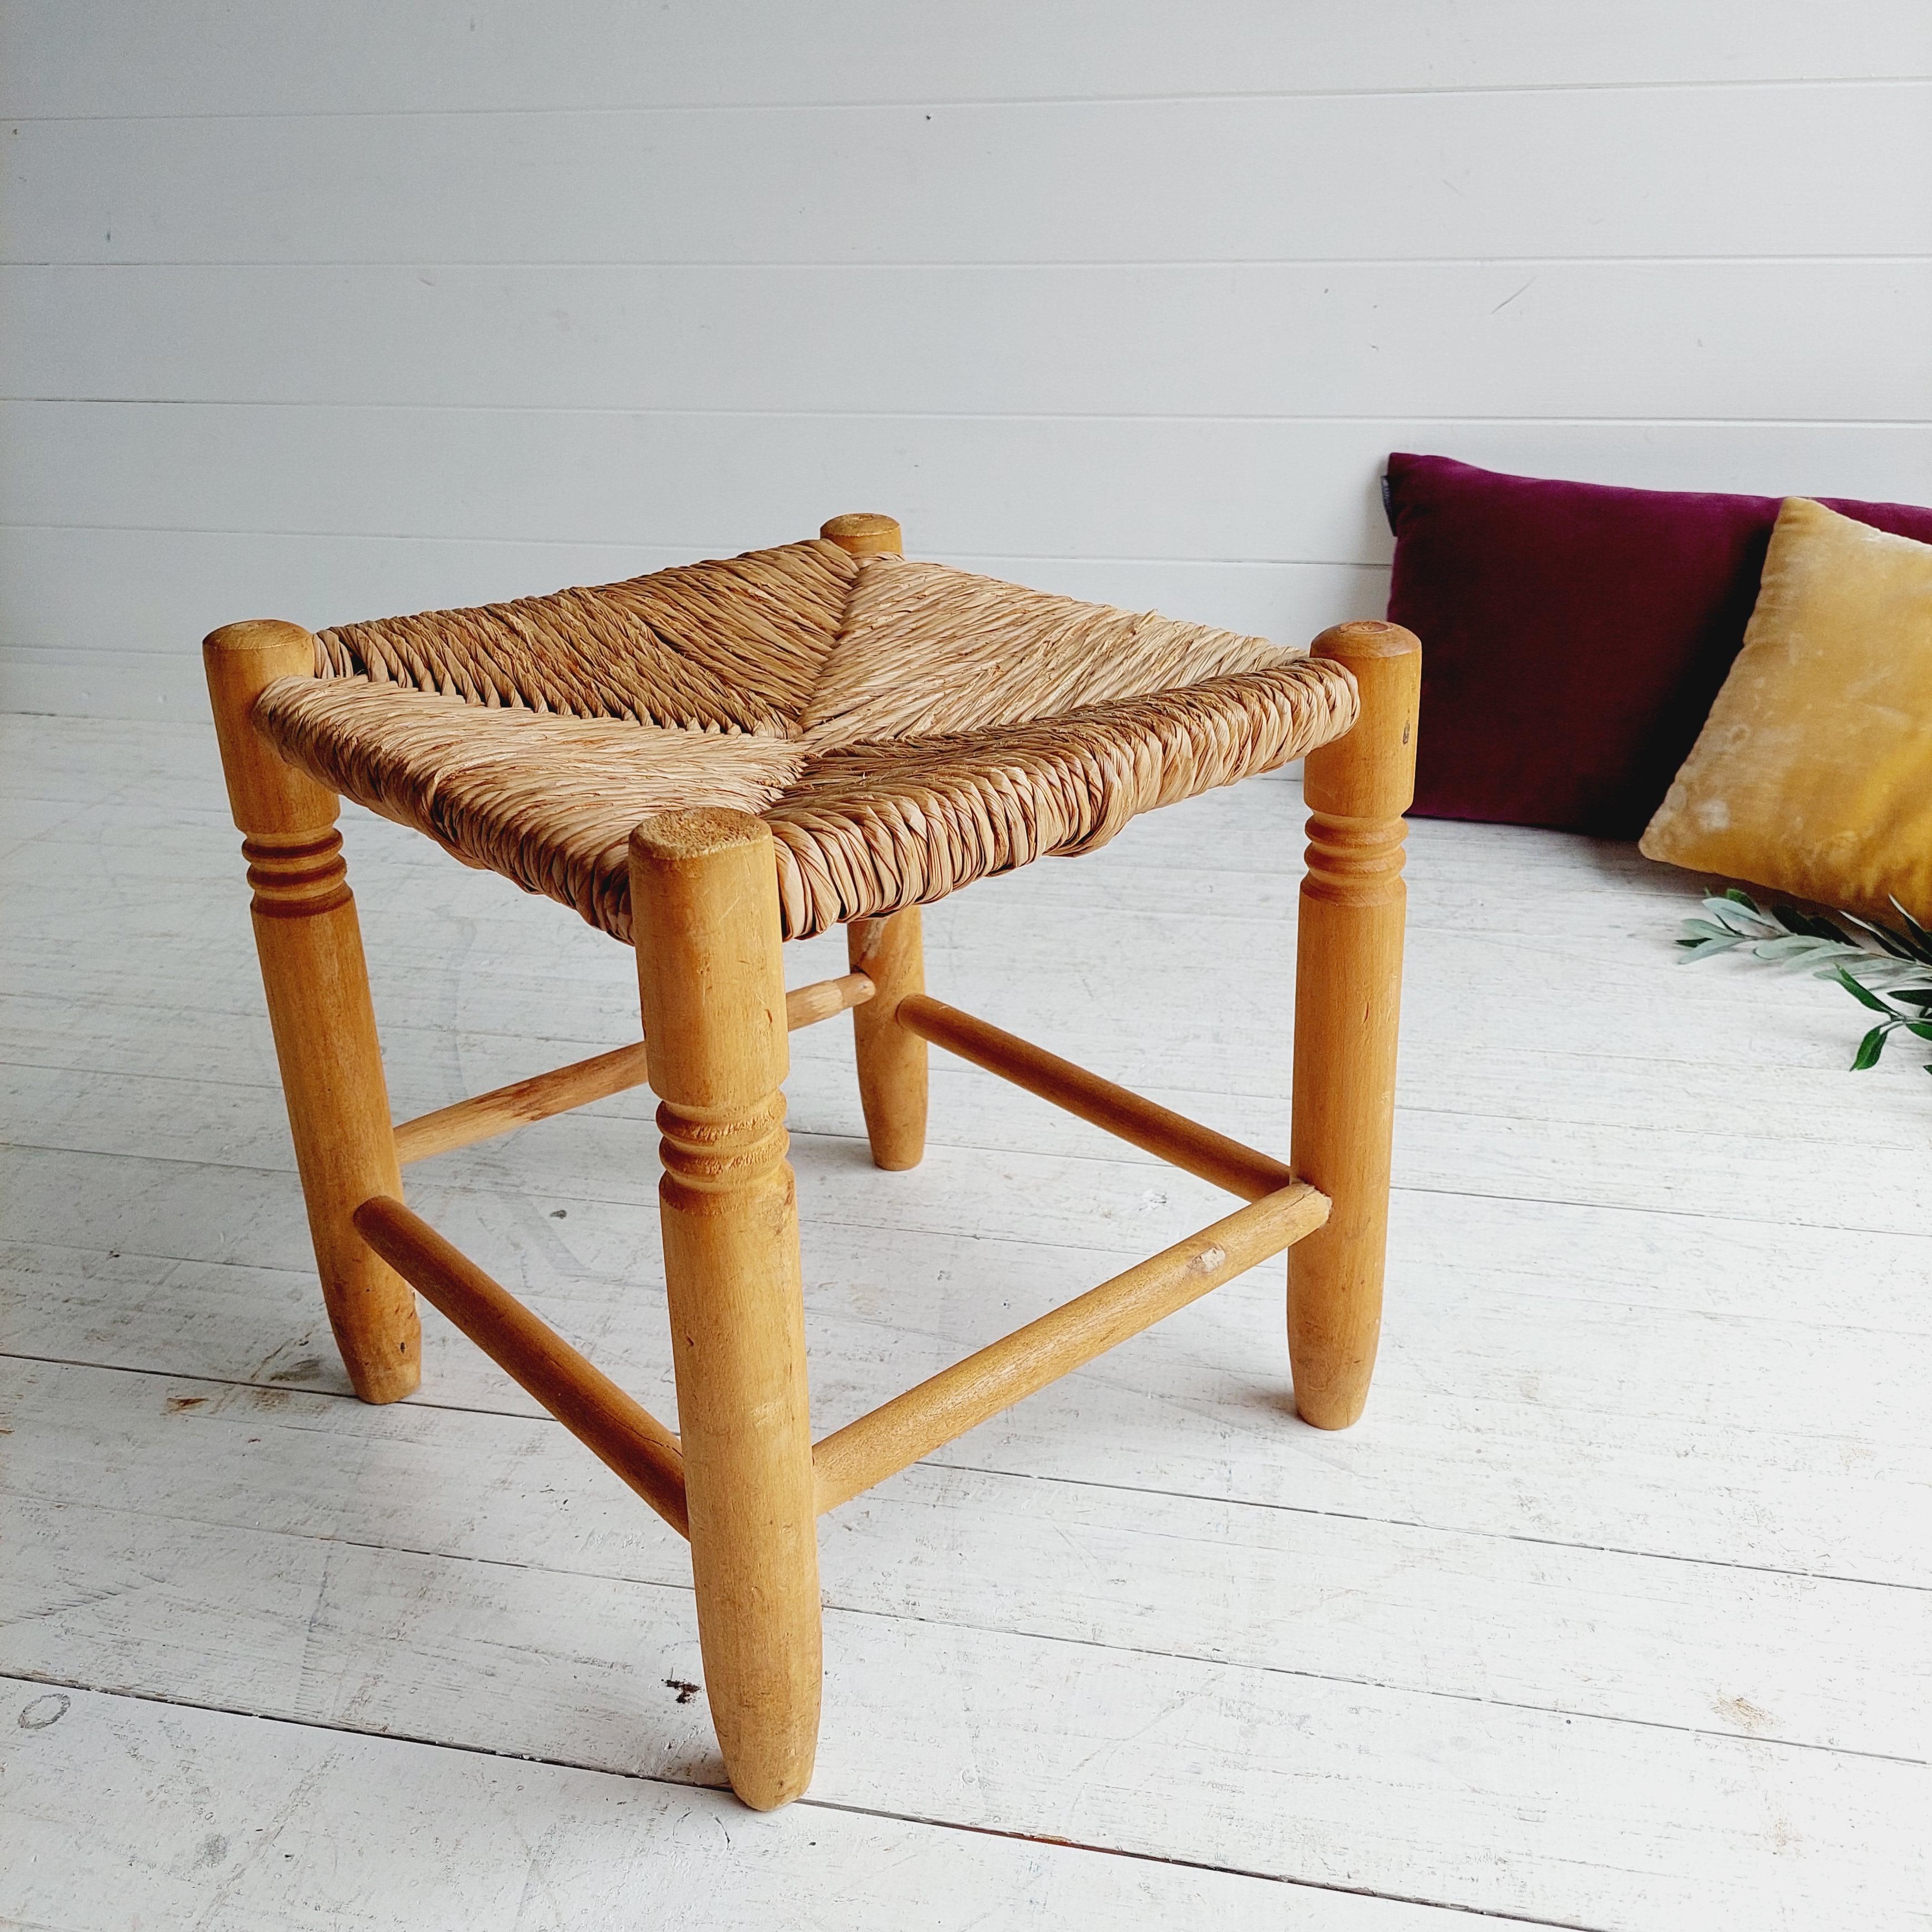 French Mid Century Scandinavian Rustic Wood And Straw Stool Charlotte Perriand Style 50